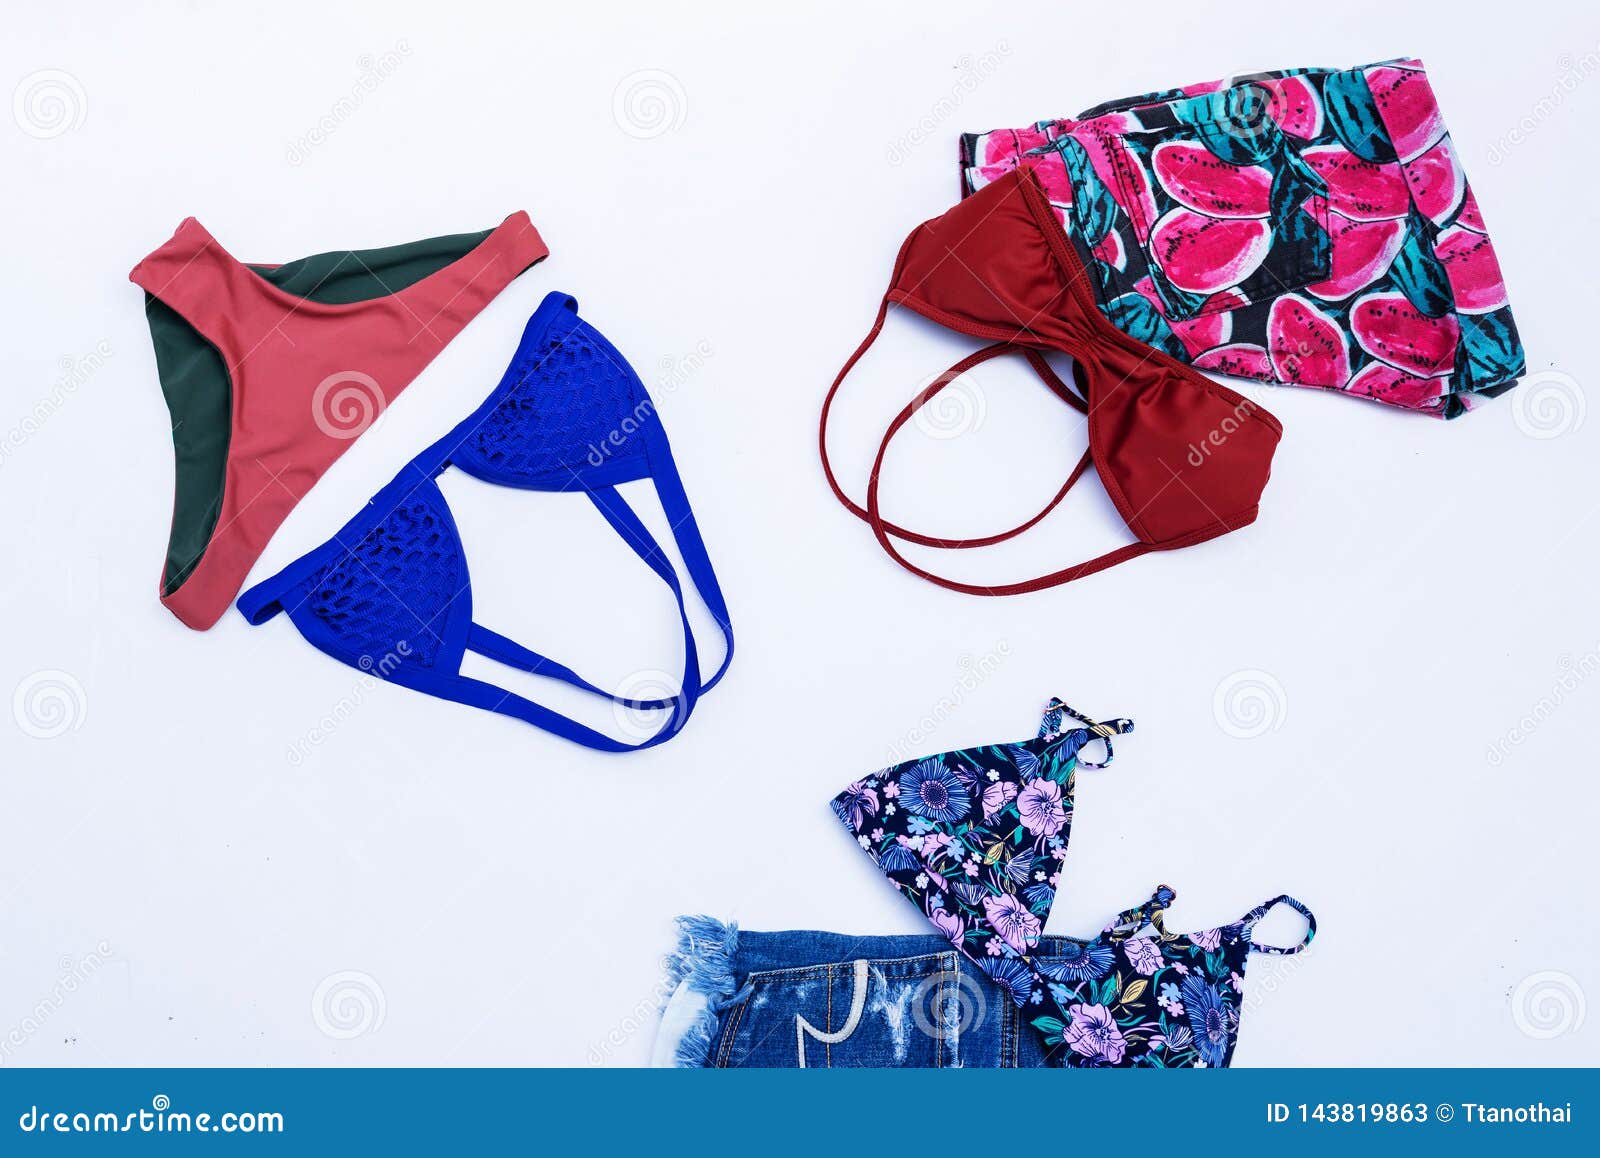 Summer Bikini Swimsuit Clothes and Accessories Concept Stock Image ...